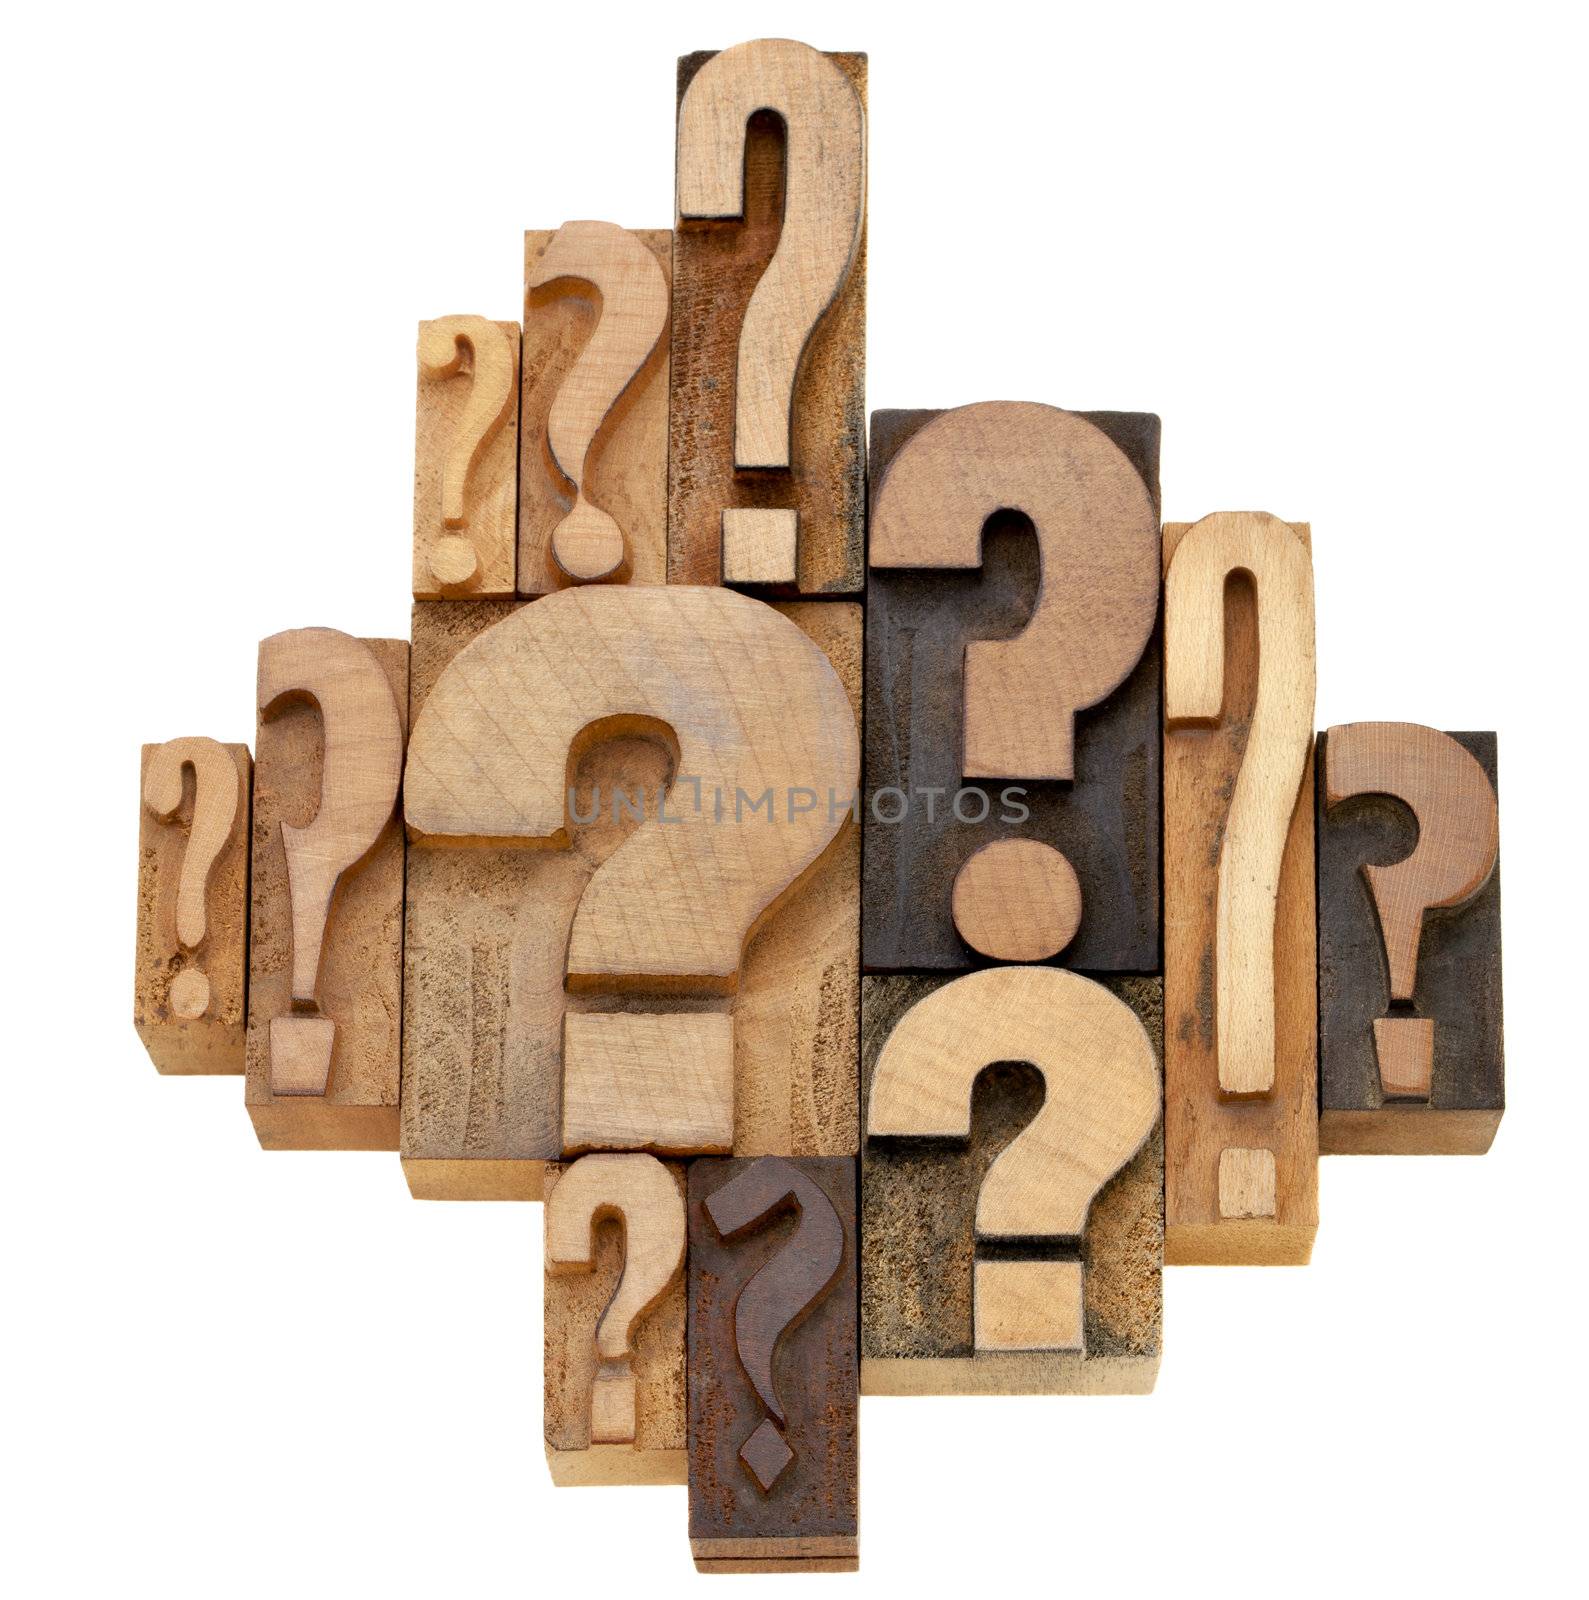 decision making or brainstorming concept - a collection of question marks - vintage wood letterpress printing blocks